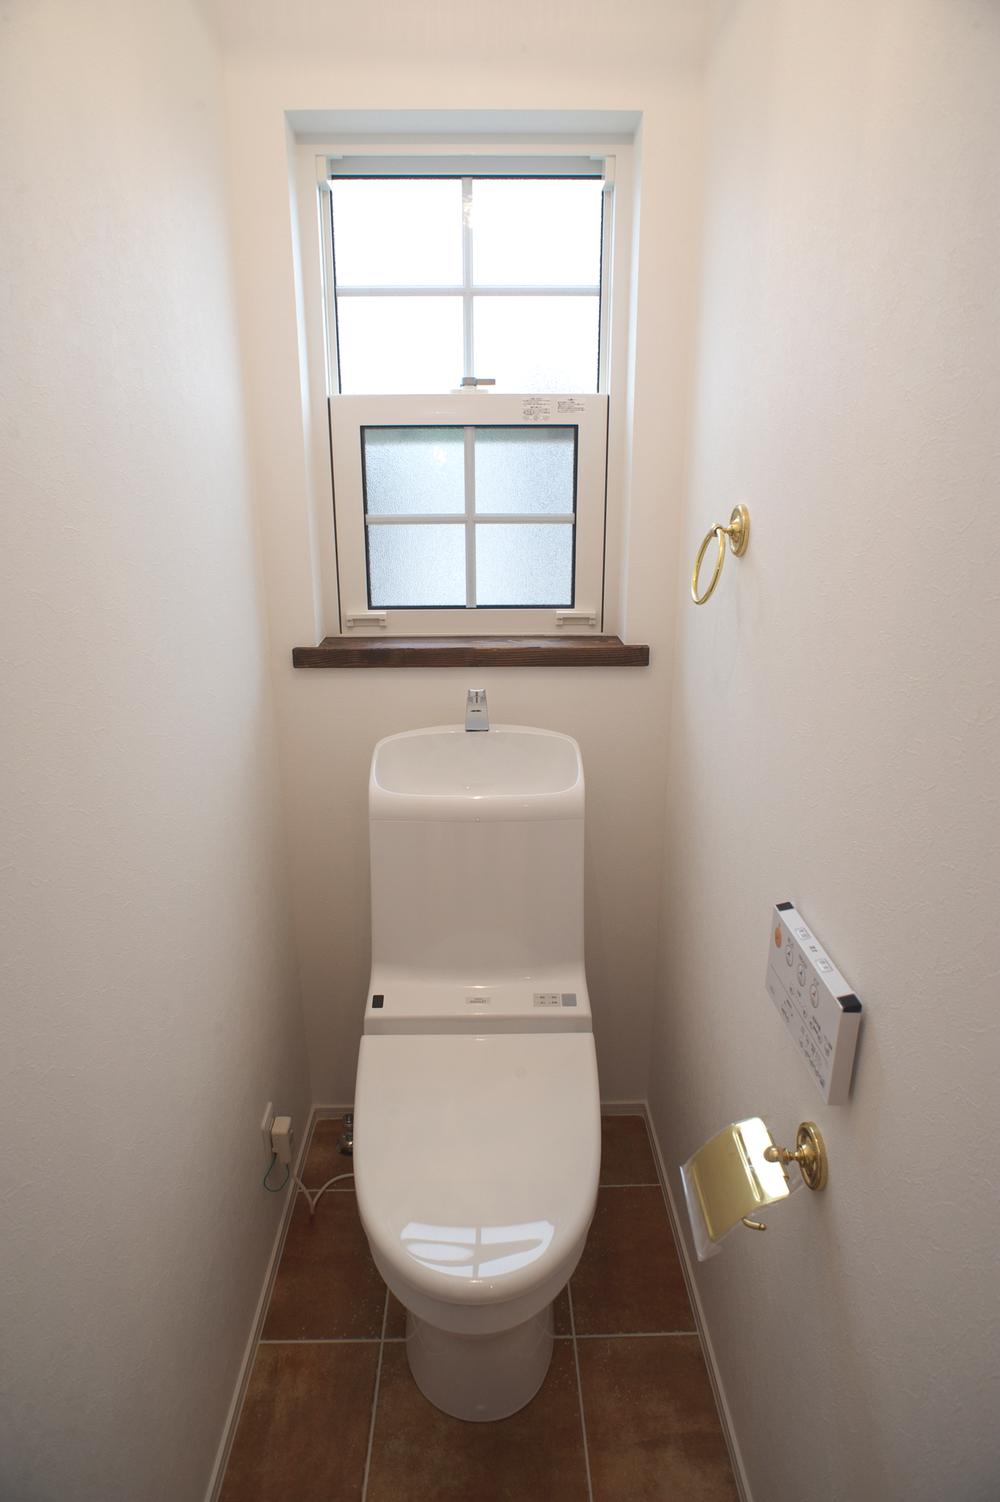 Other Equipment. We use the tile to the floor of the <same specifications Photos> toilet. 